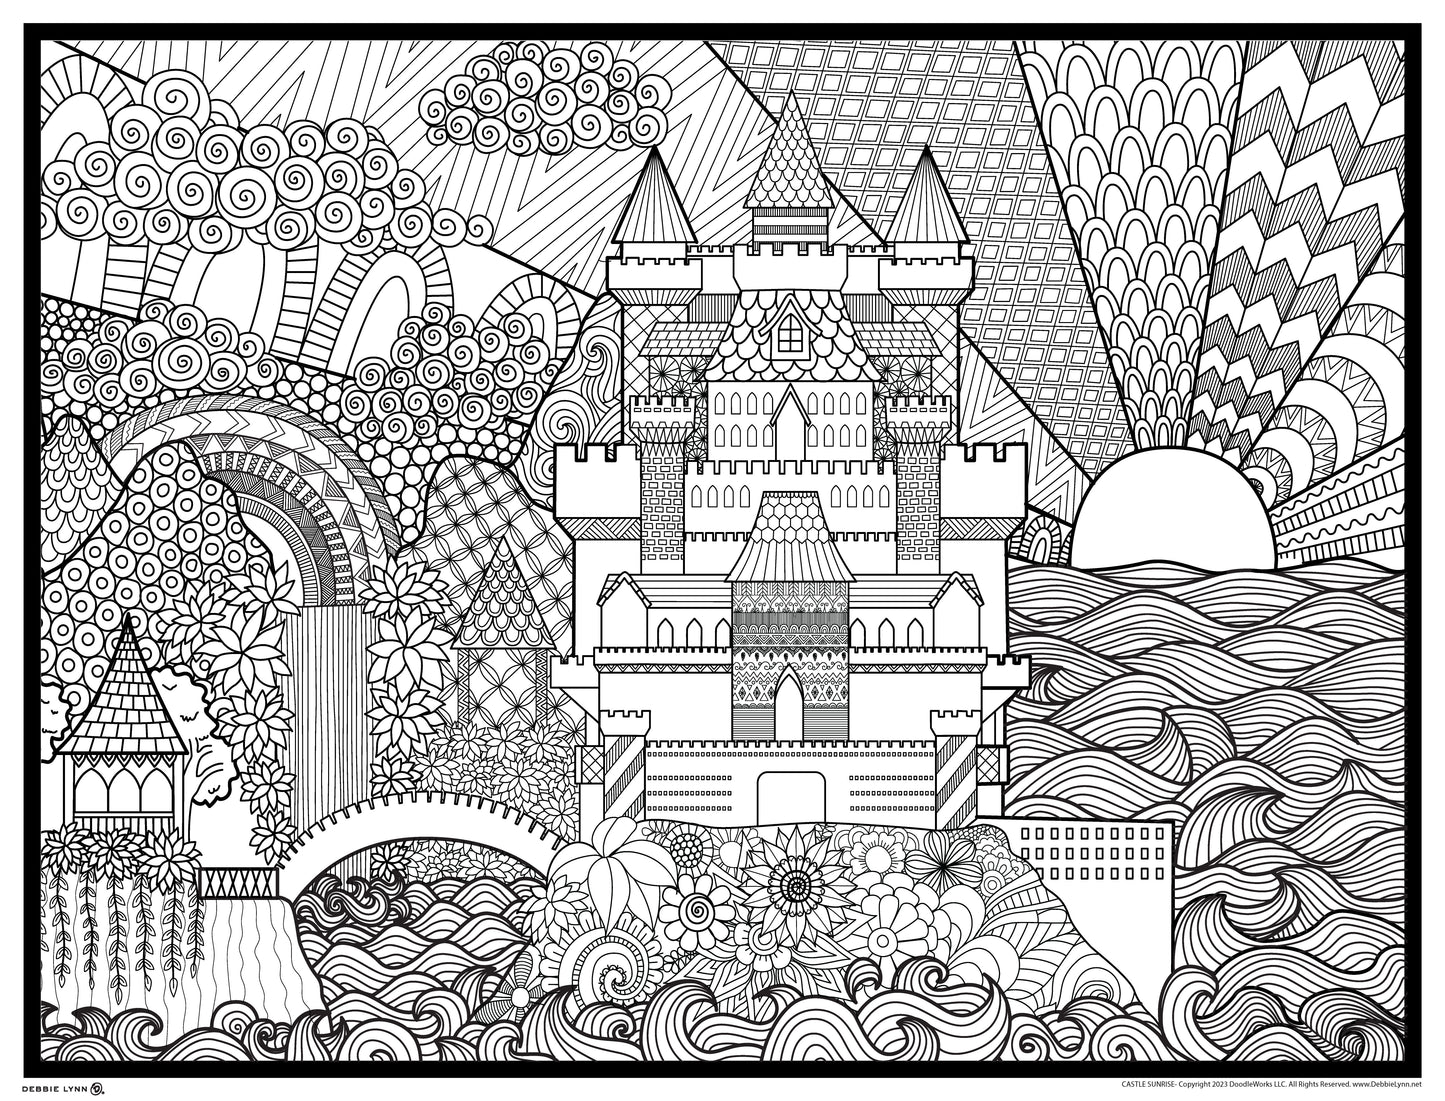 Castle Sunrise Personalized Giant Coloring Poster 46"x60"